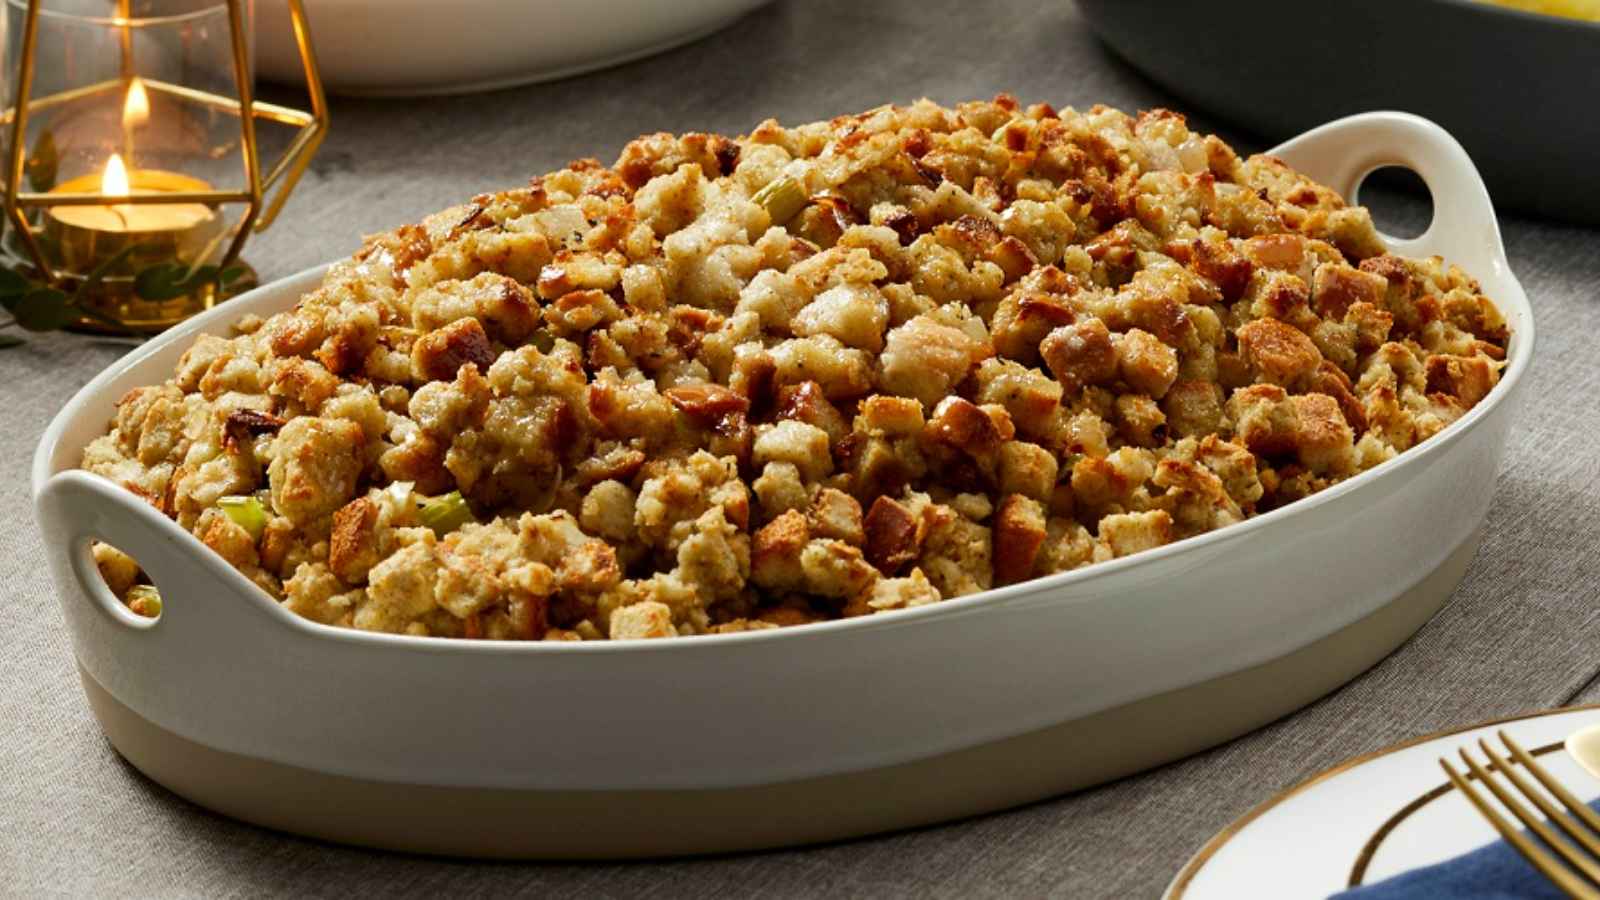 National Stuffing Day 2022: Date, History and Recipes